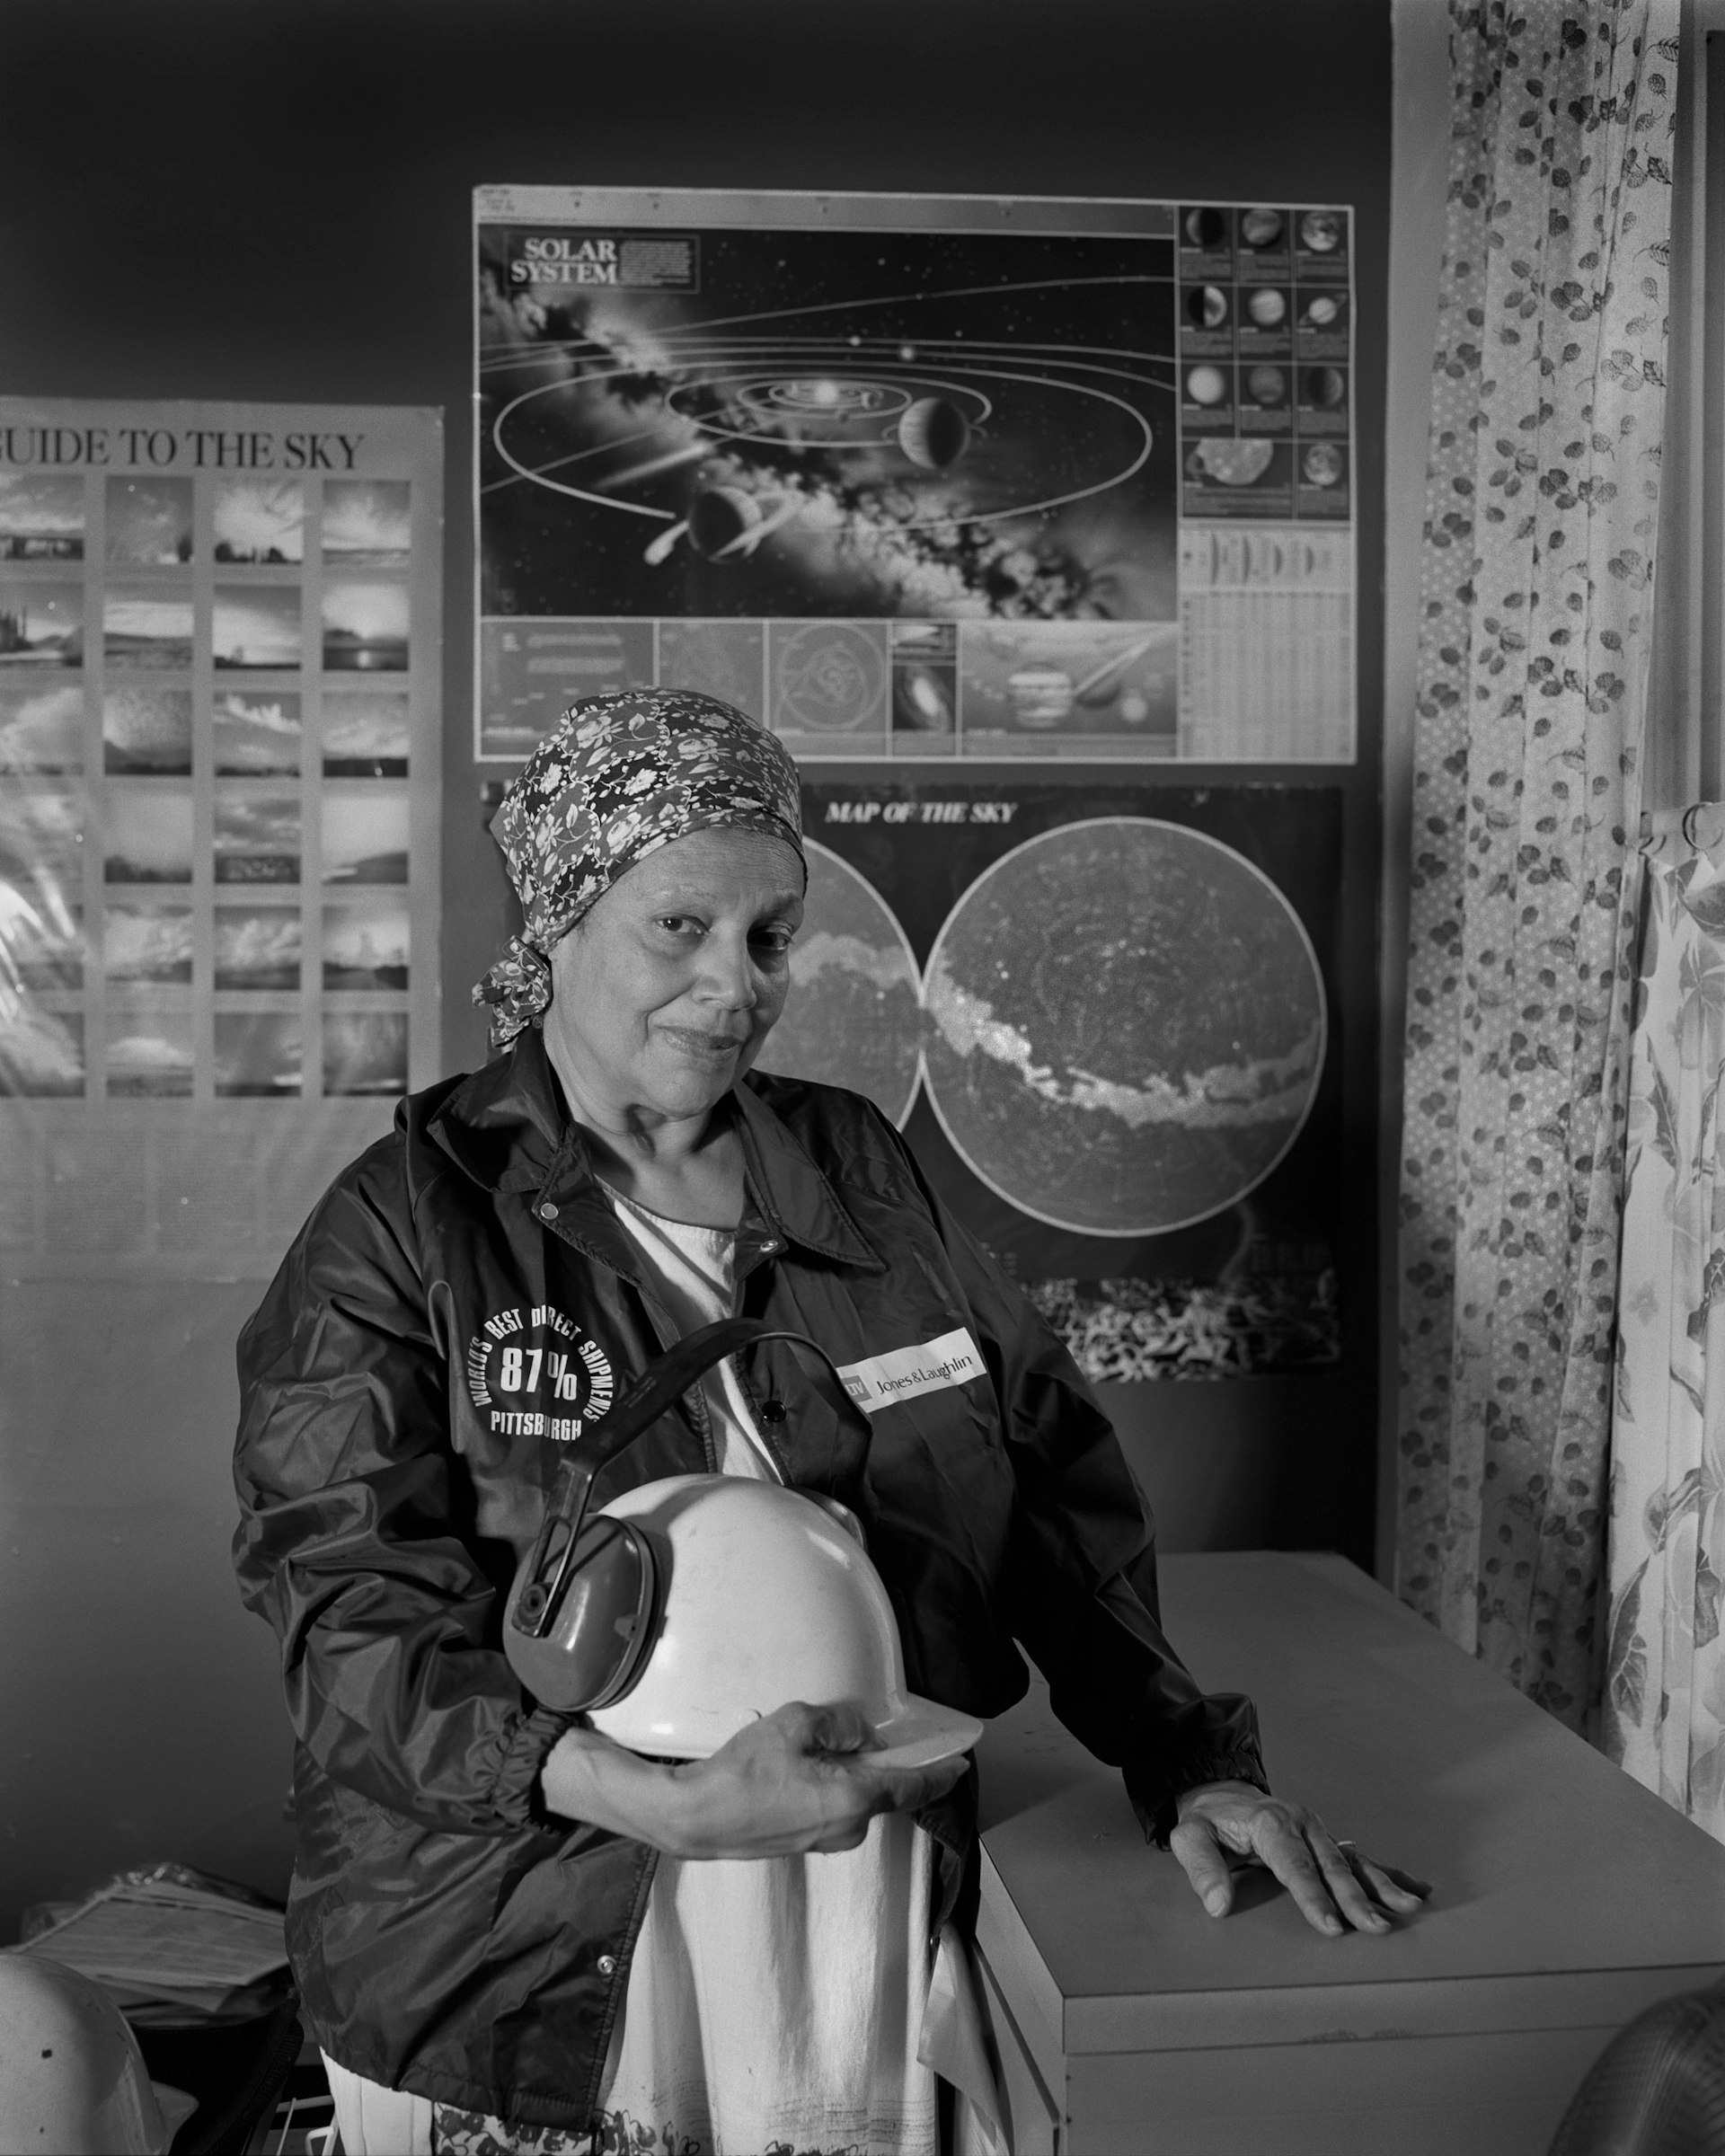 Sandra Gould Ford in Her Office in Homewood PA, 2017. LaToya Ruby Frazier. Courtesy of the artist and Gavin Brown’s enterprise, New York/Rome. “Sandra Gould Ford is a renaissance woman who lives in Homewood, Pennsylvania. For eight years, she worked as a secretary at the steel mill Jones & Laughlin. Even though it wasn’t permitted to photograph on the grounds, she snuck her cameras in to document workers’ lives with deep compassion for over two decades. The images are so beautiful that they look like Precisionist paintings – yet she’s been completely overlooked by the history of art in Pittsburgh. My latest project, On the Making of Still Genesis: Sandra Gould Ford, is all about this incredible work which has gone ignored.” 